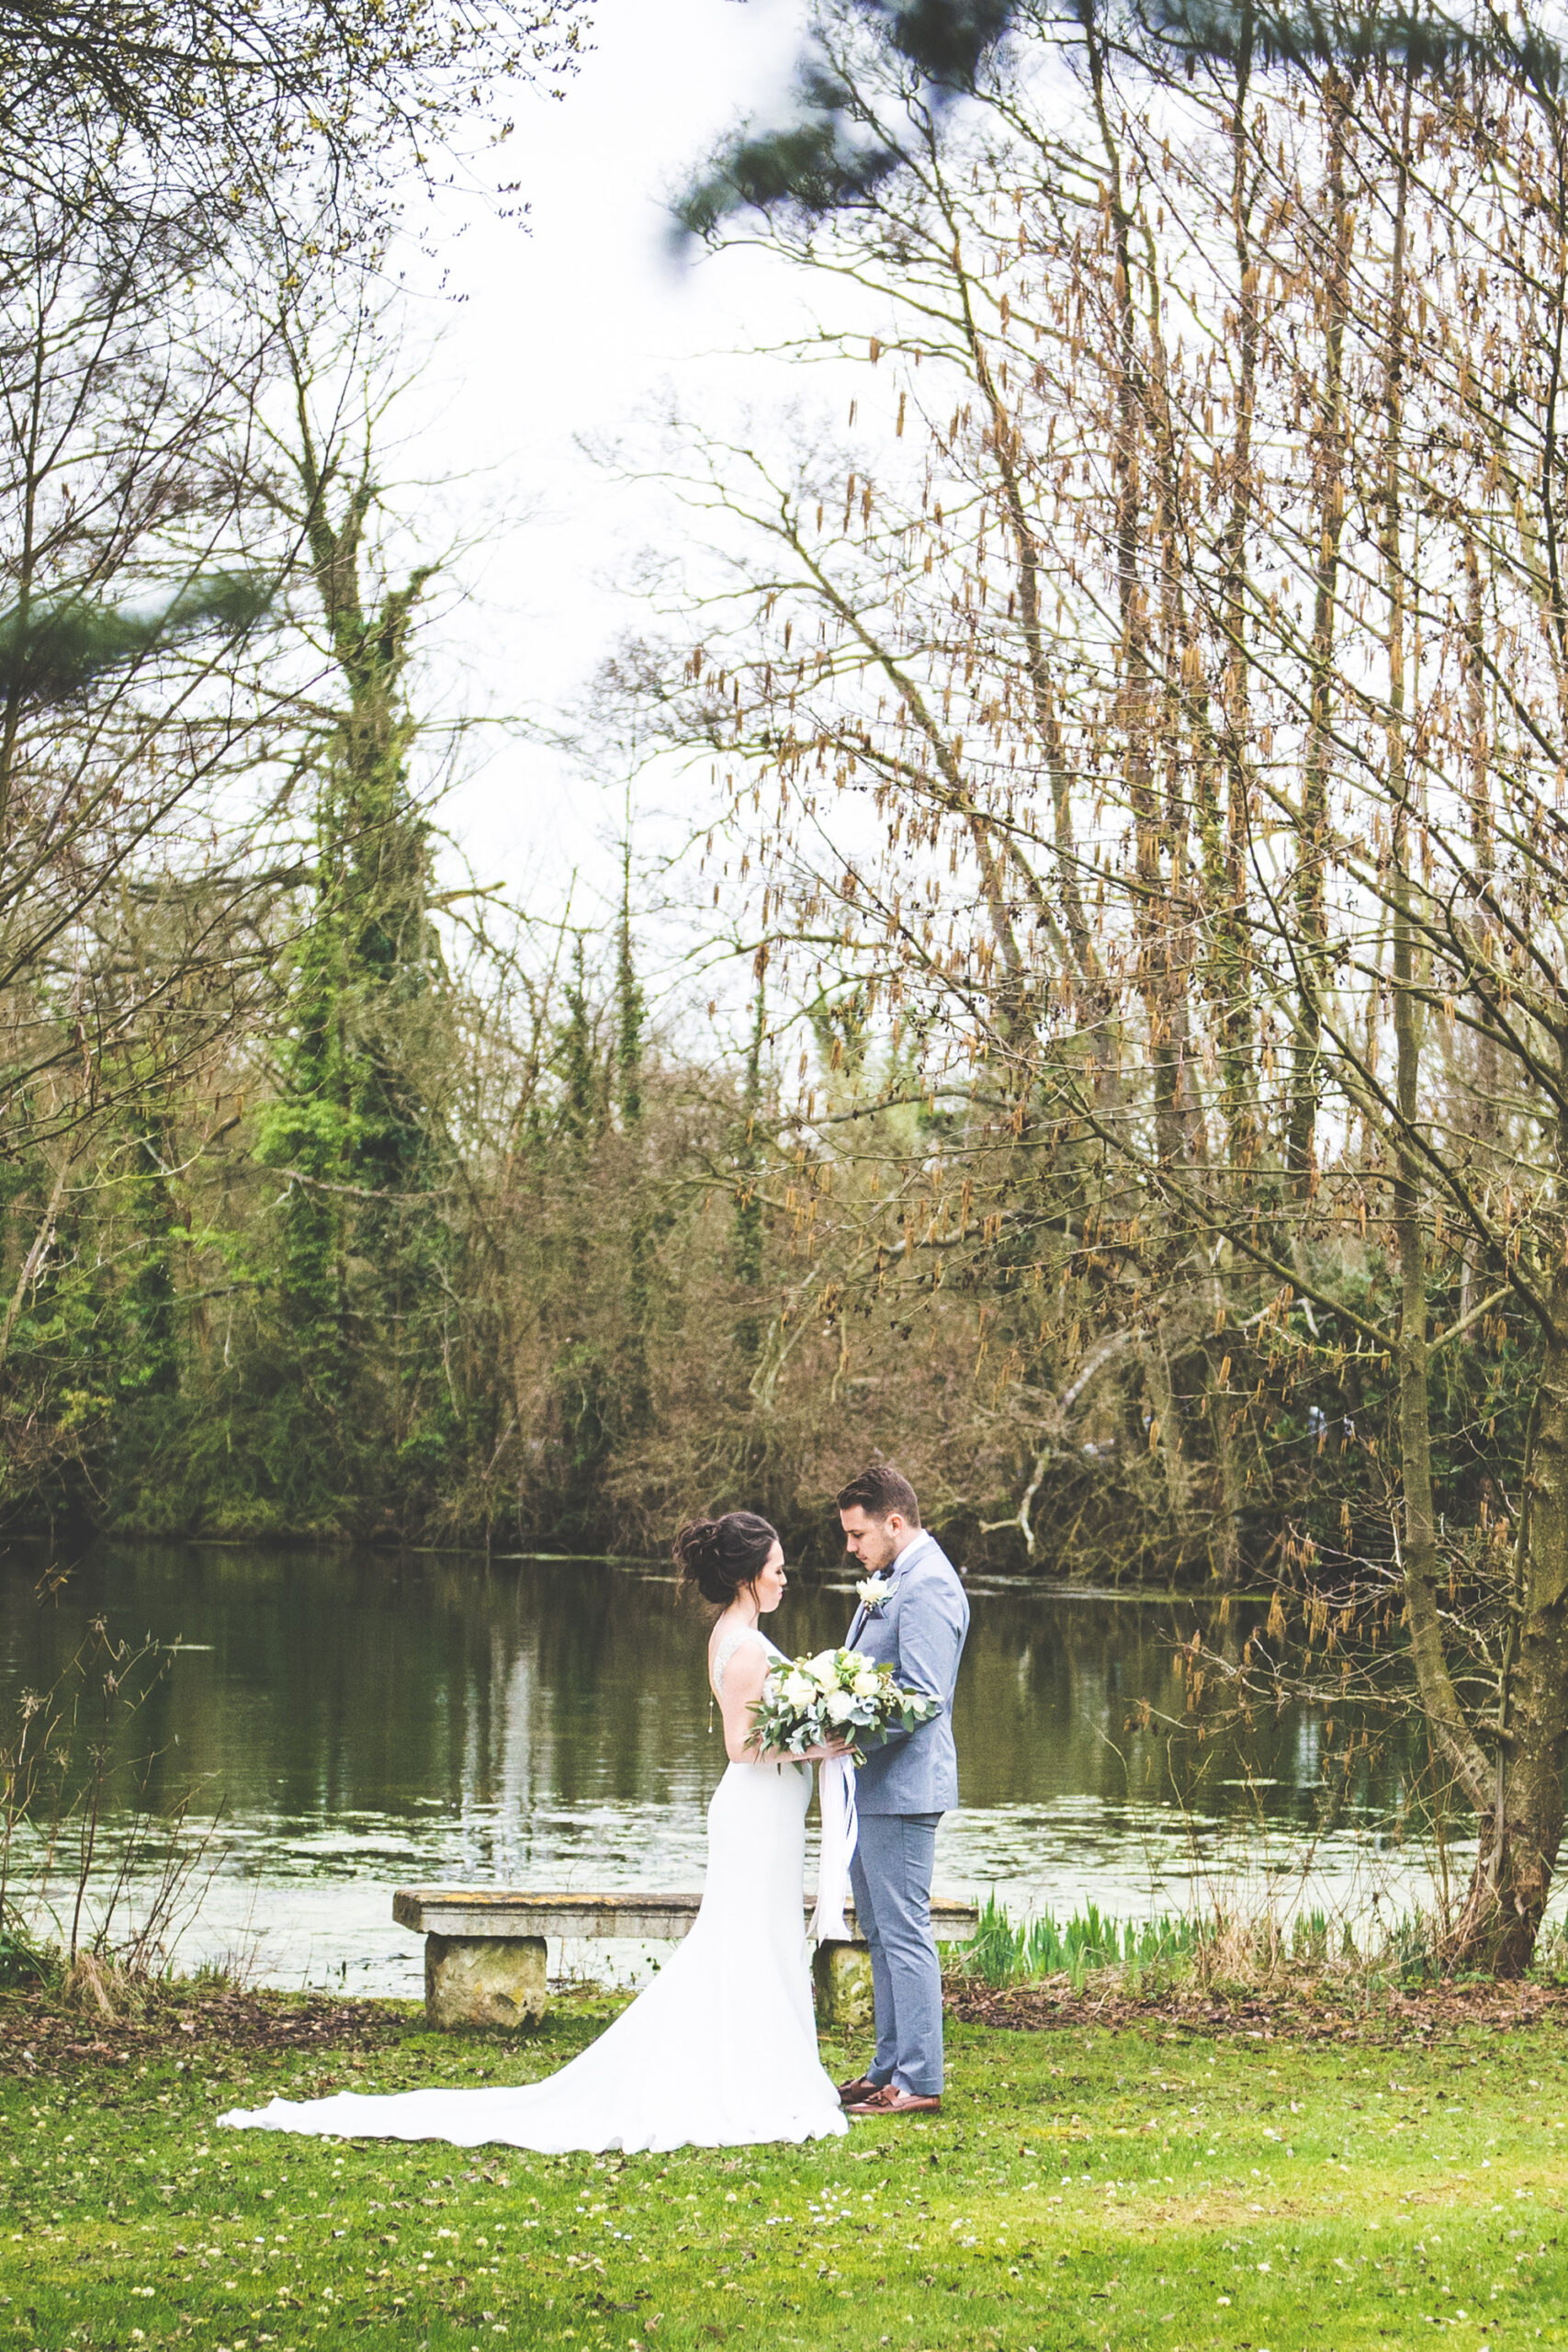 Rustic_Chic_Wedding_Inspiration-A_Knights_Tale_Photography_SBS_013